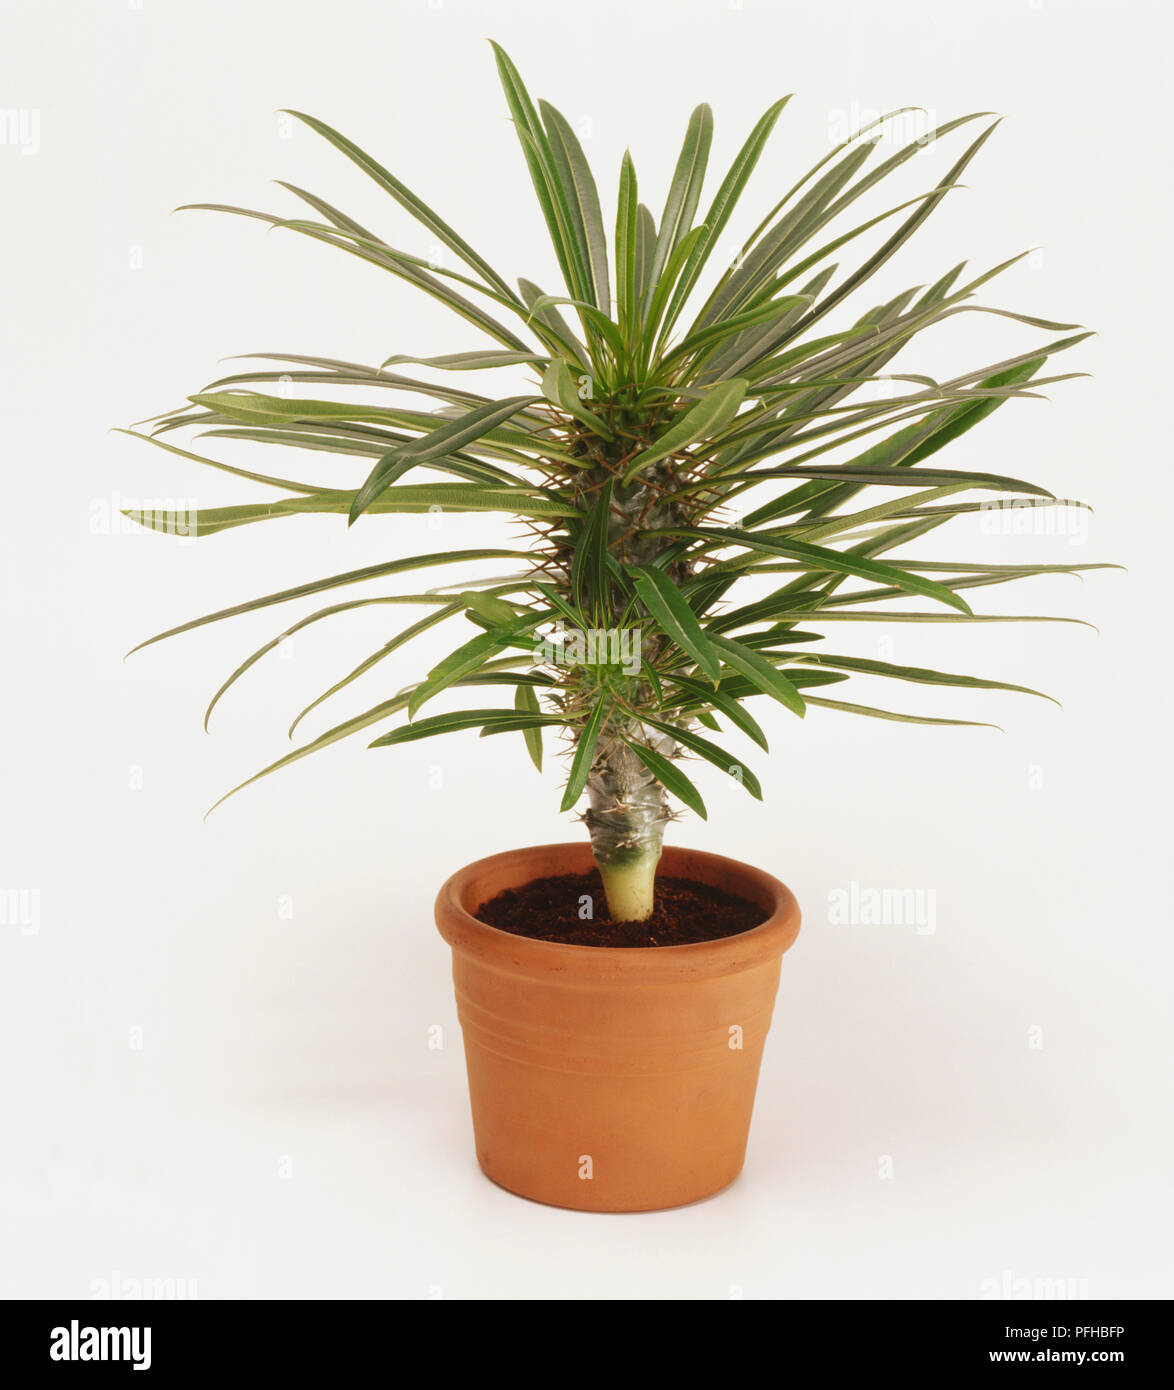 Madagascar palm, pachypodium lamerei in terracotta plant pot, spiny stems long narrow leaves. Stock Photo